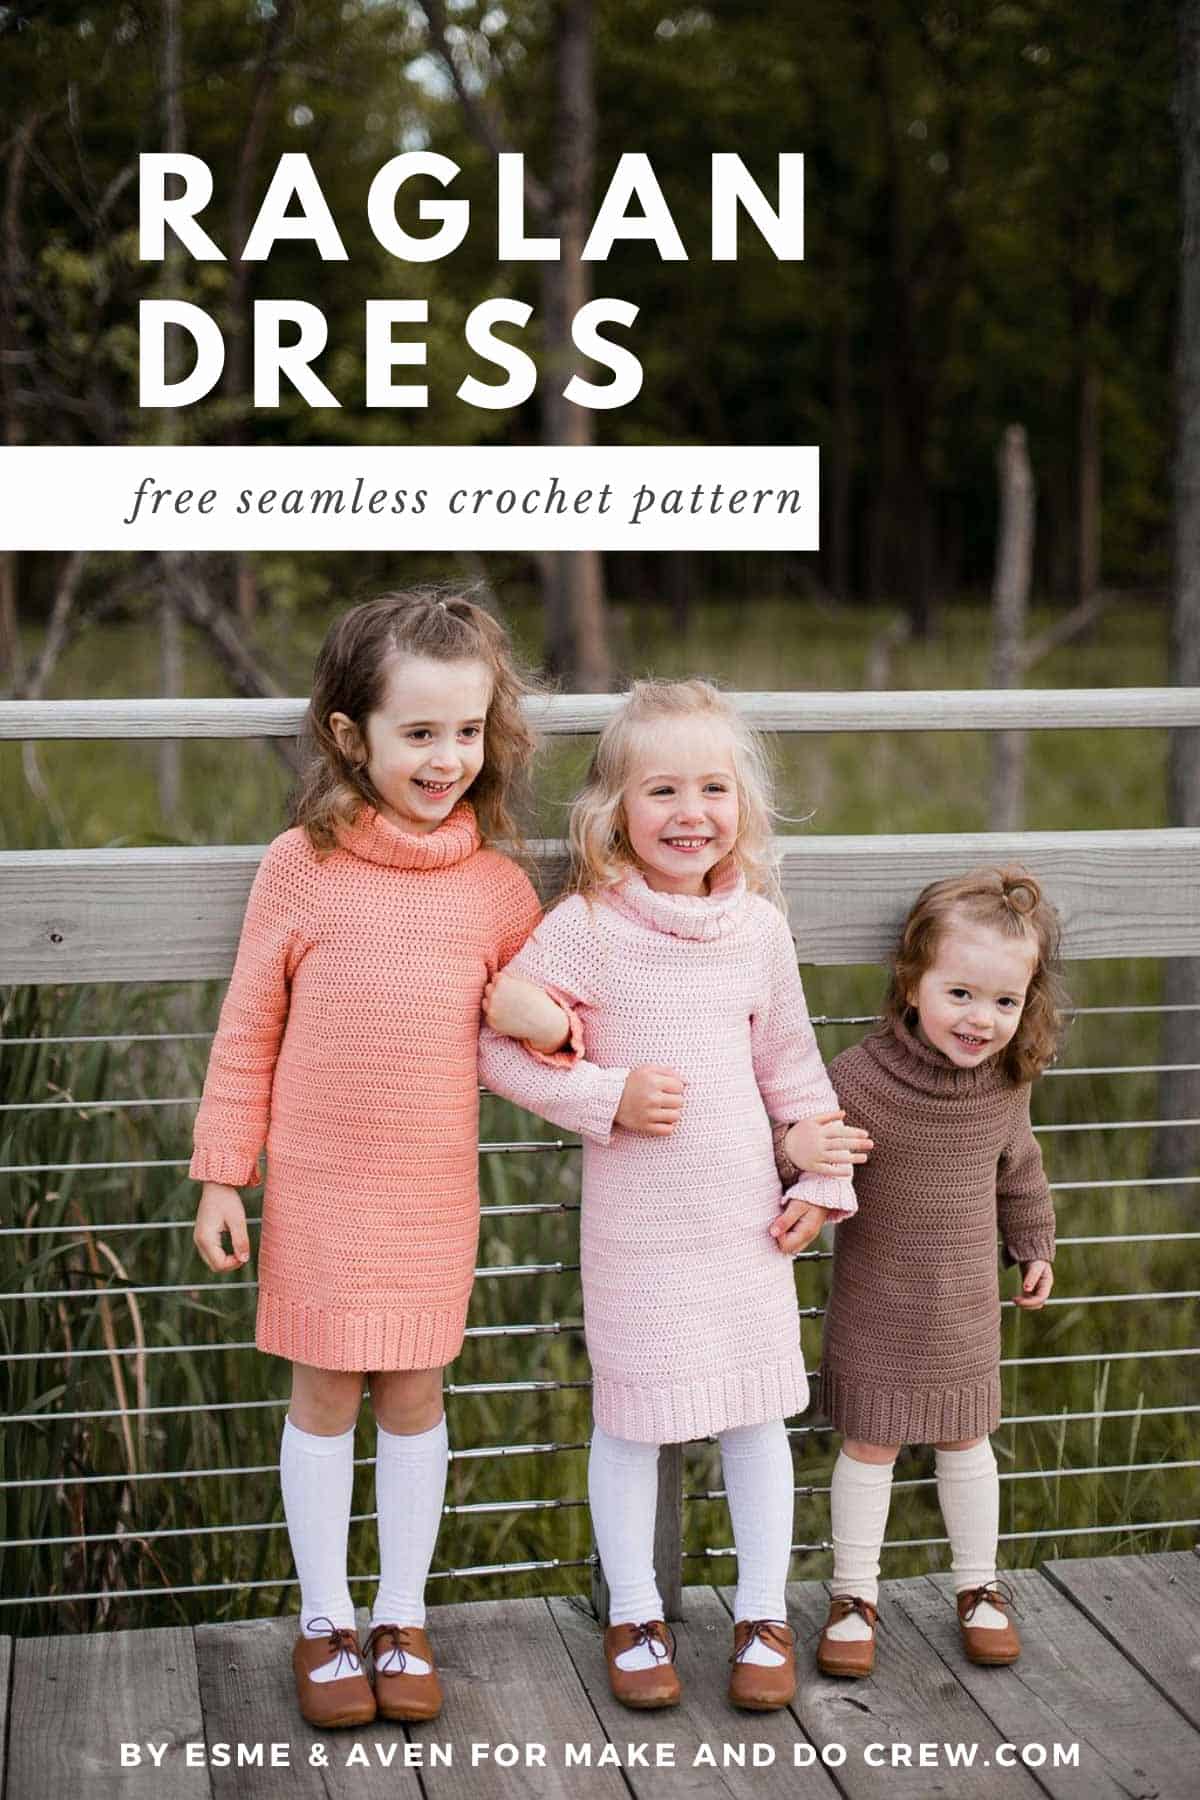 Three girls standing on sidewalk wearing crochet sweater dresses in coral, light pink, and brown. The girls are hooking their arms together and smiling.